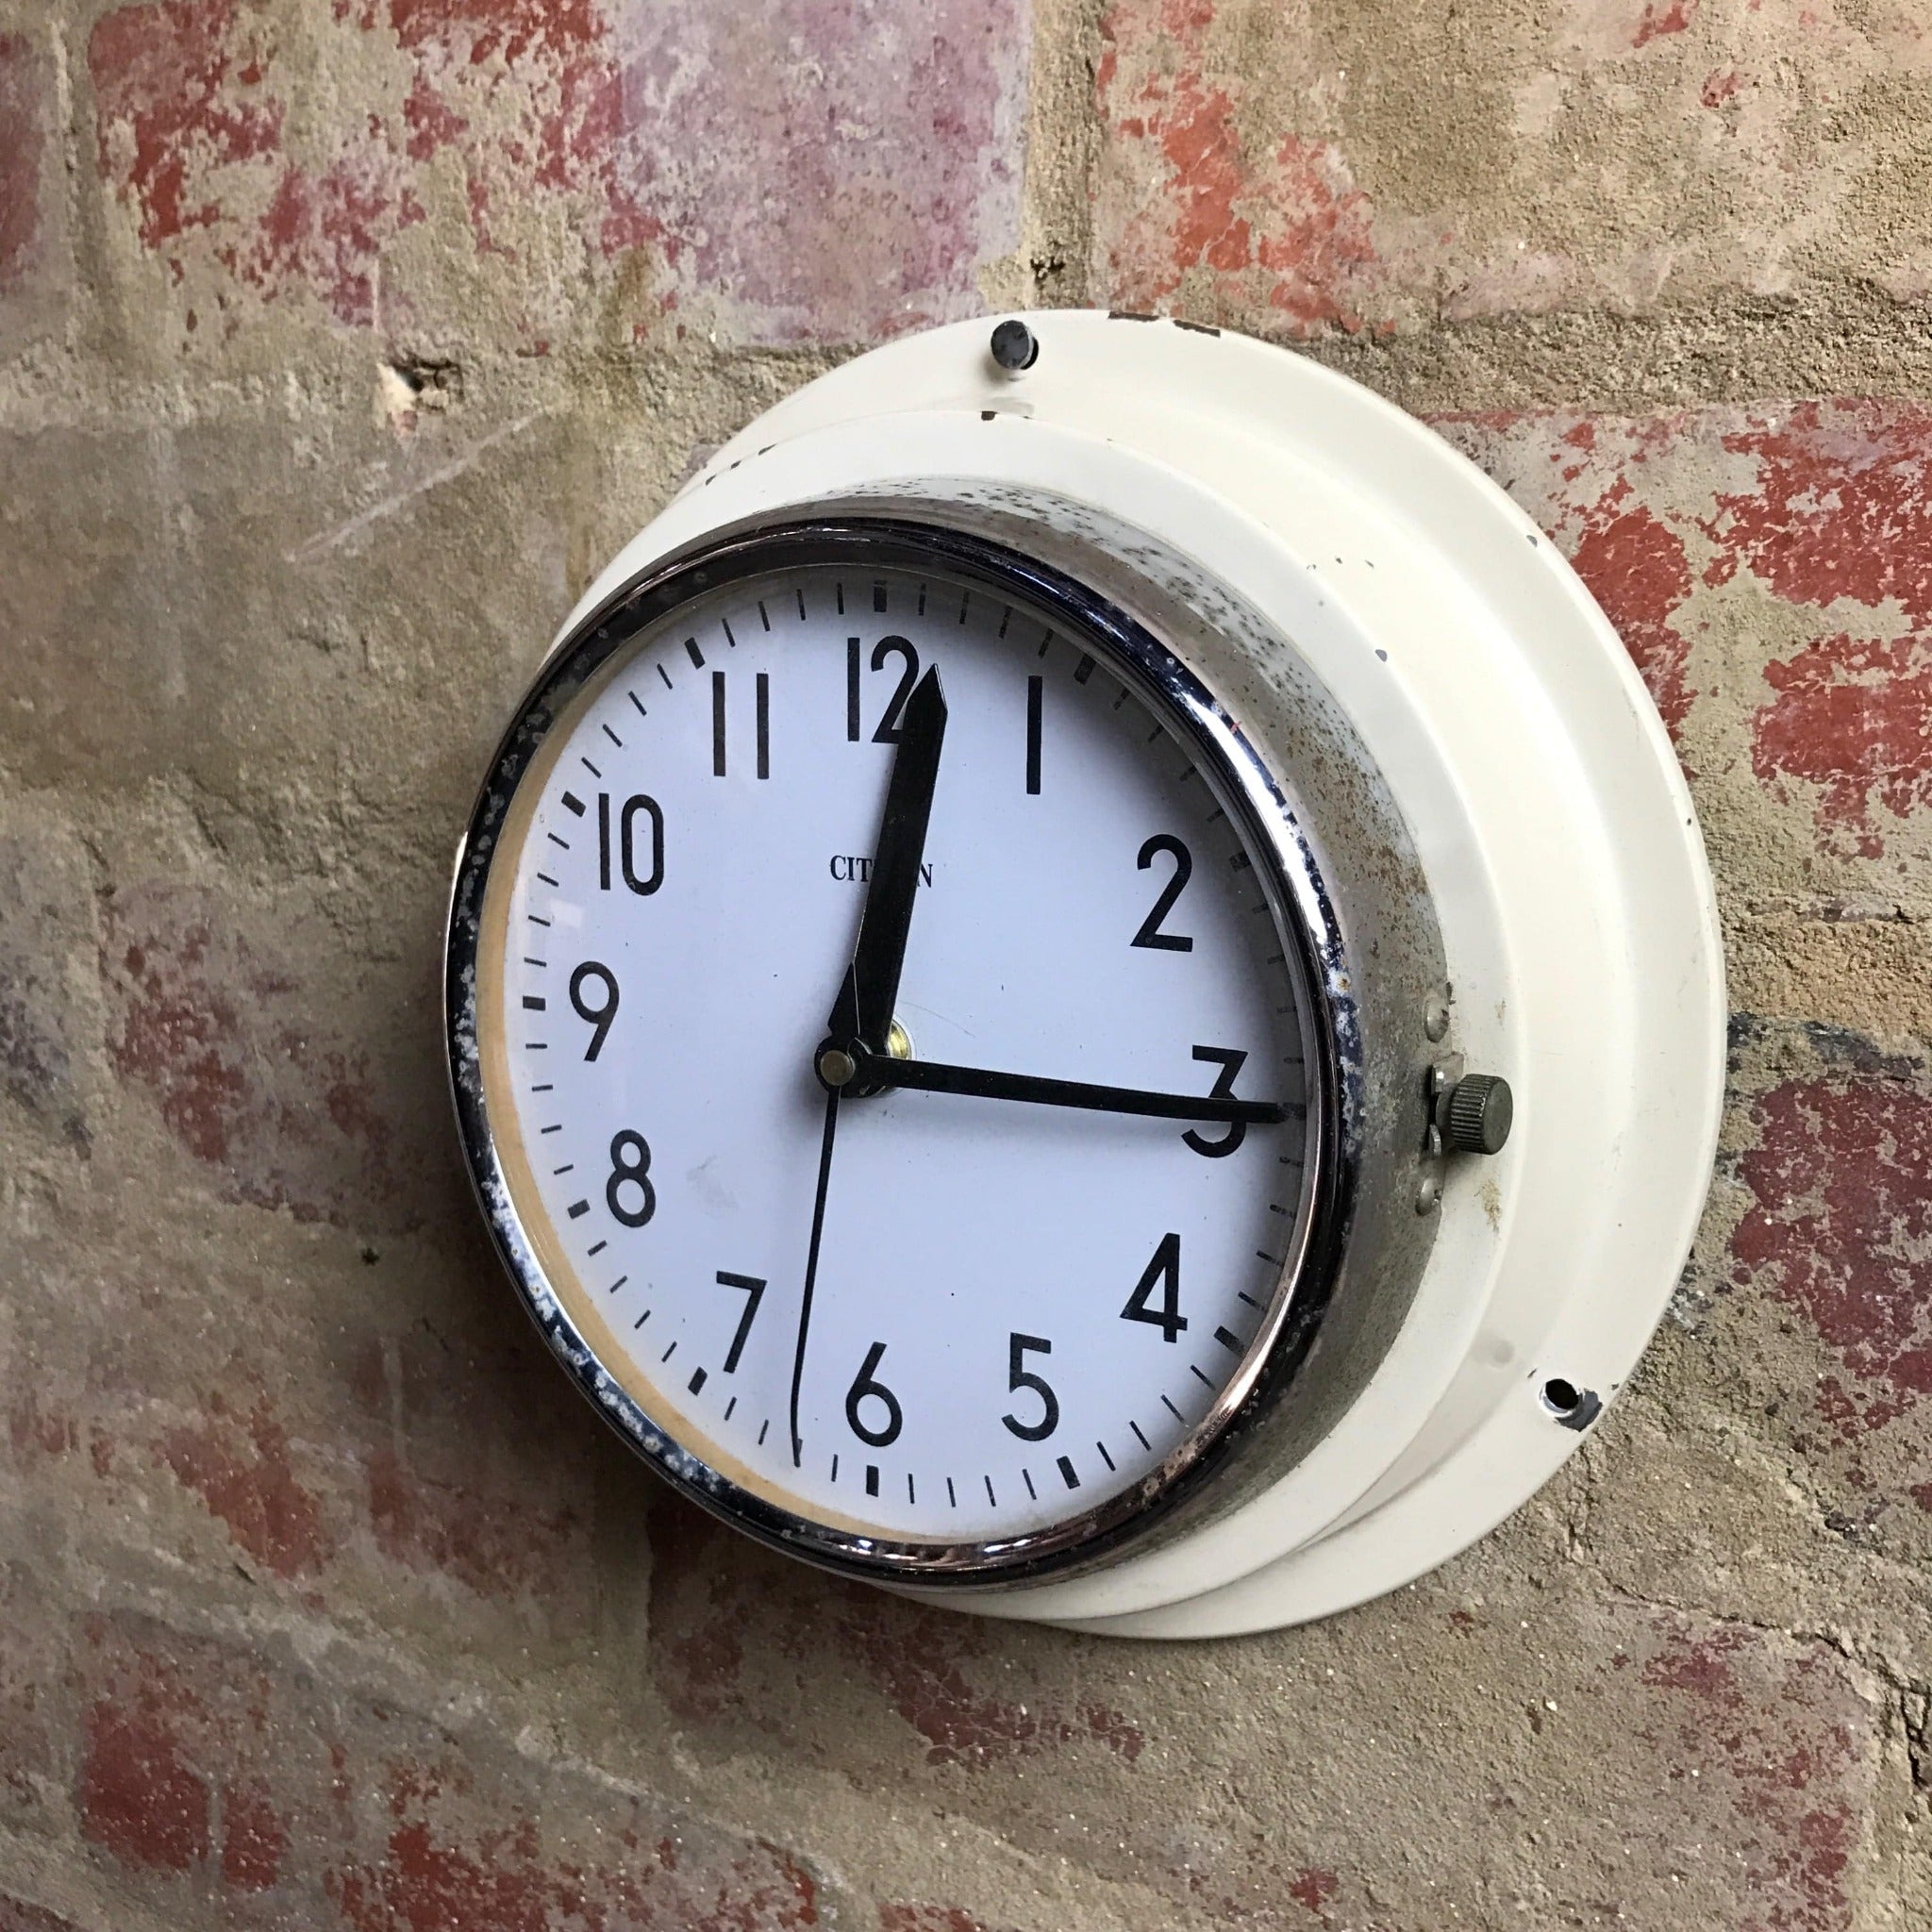 Rustic cream Citizen clock with thick metal frame. Red brick background. 